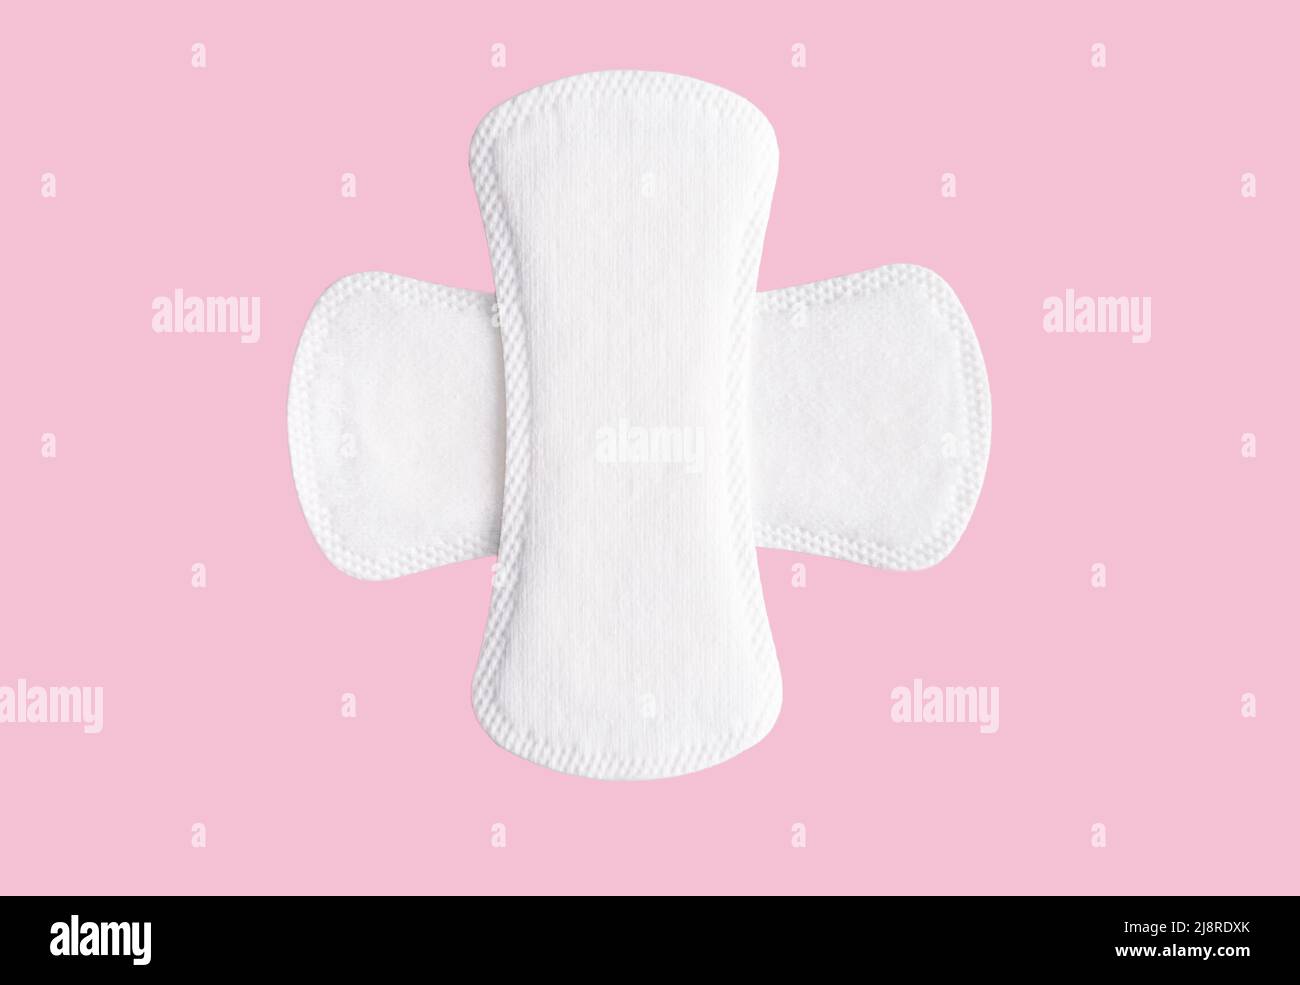 Feminine hygiene pad on a pink background. Concept of feminine hygiene during menstruation. top view Stock Photo